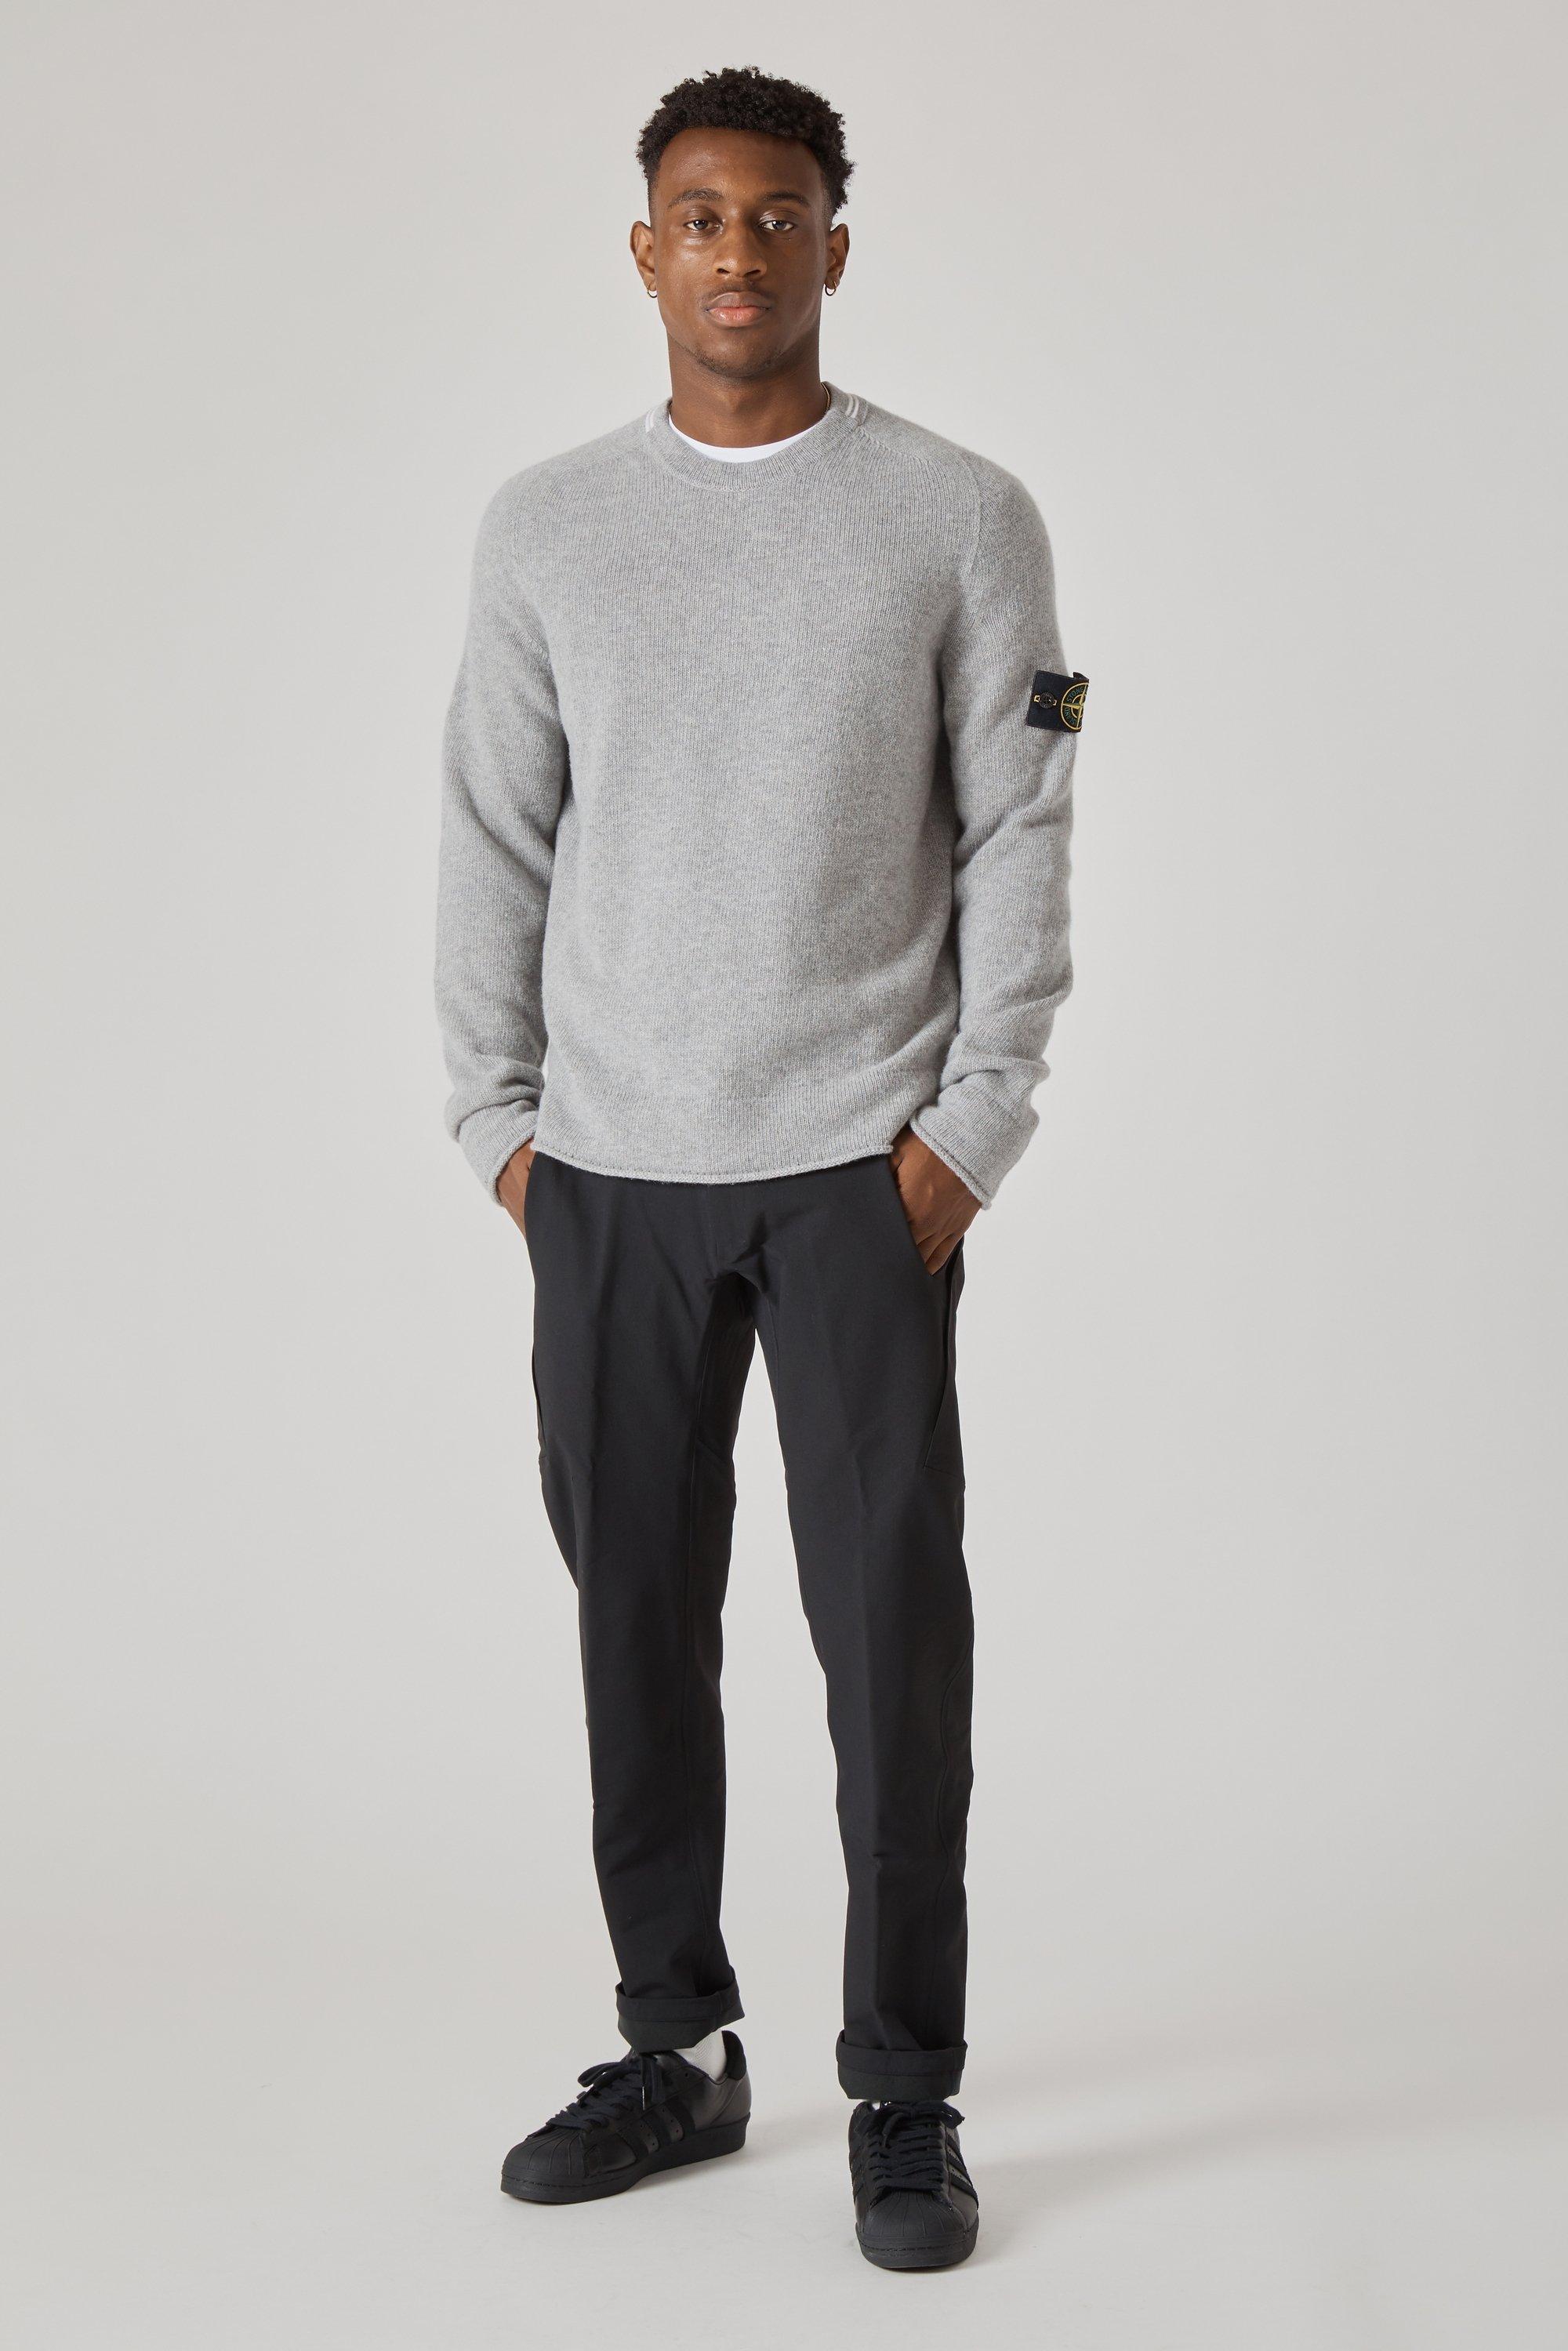 Stone Island 513a3 Lambswool Knit Sweater in Pearl Grey (Gray) for Men -  Lyst